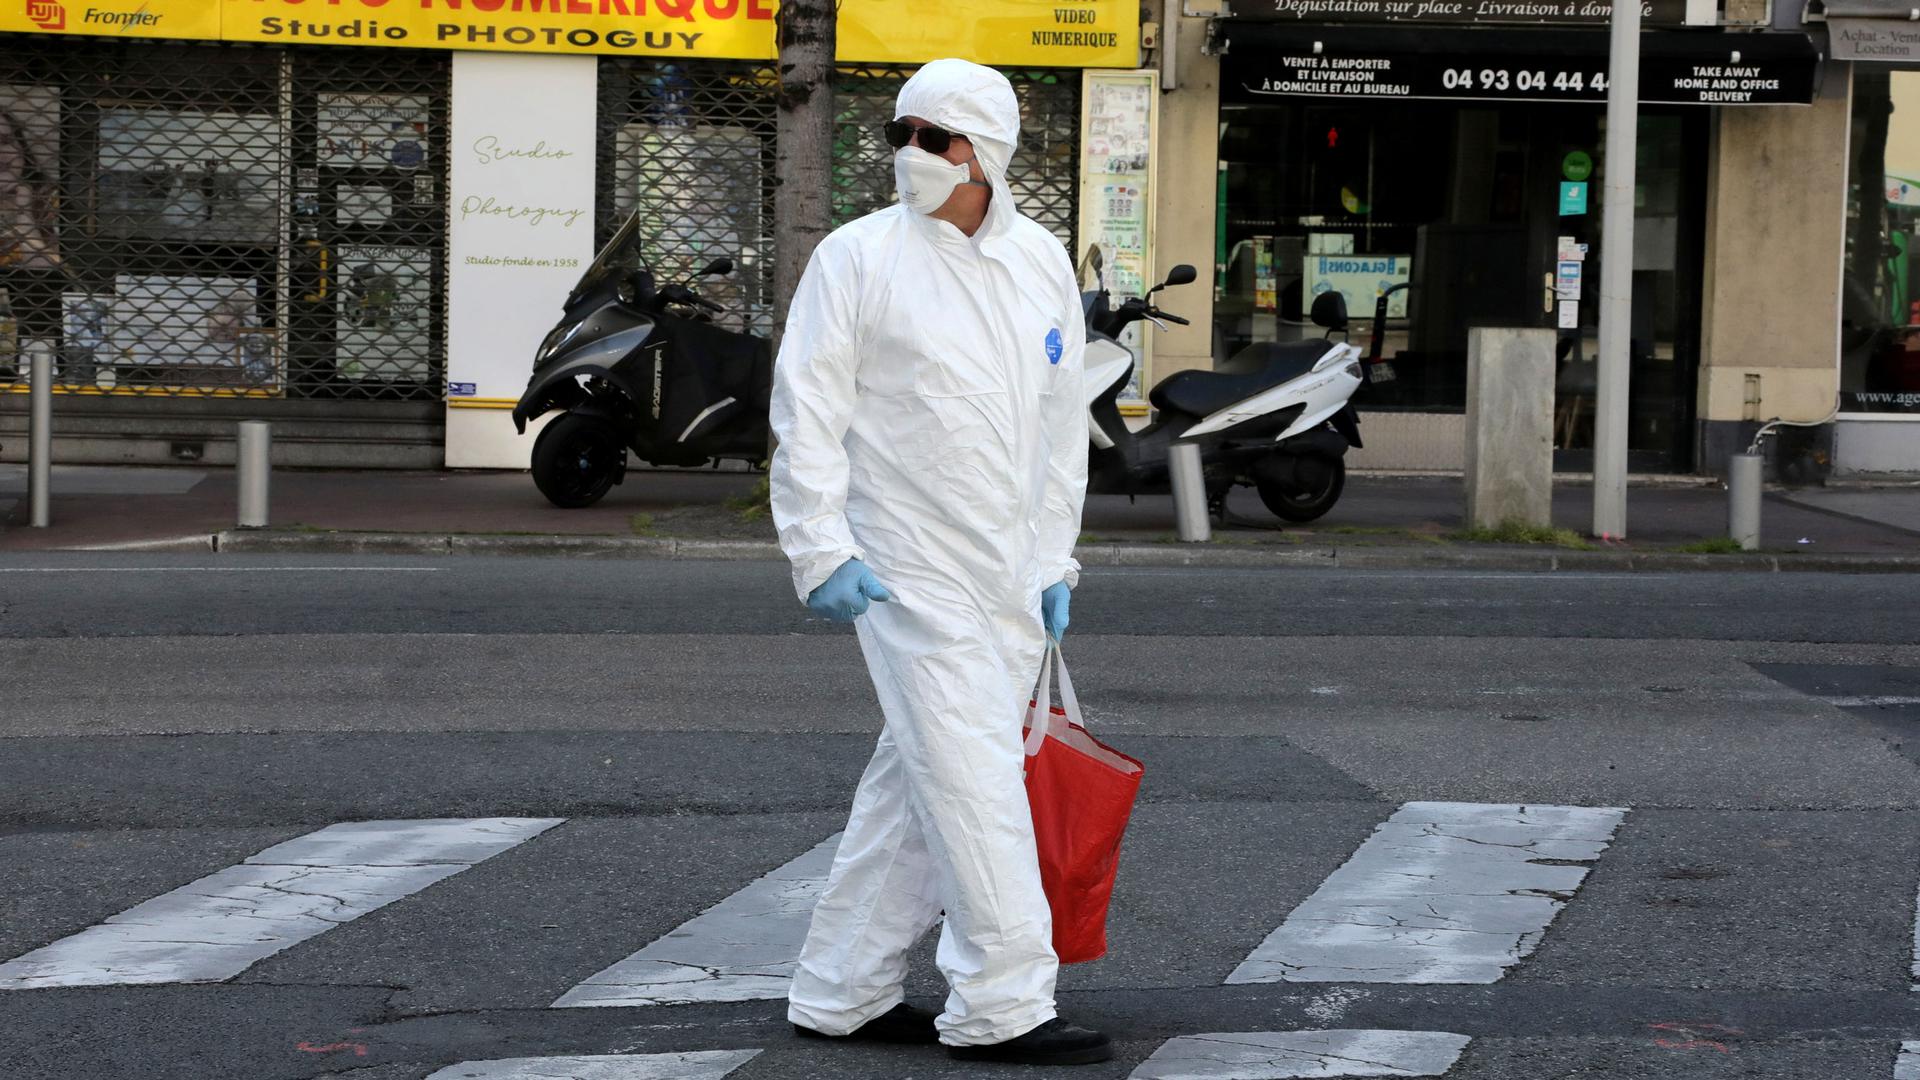 A man wearing a white protective suit and face mask with sunglasses is shown looking over his shoulder while walking in a street.